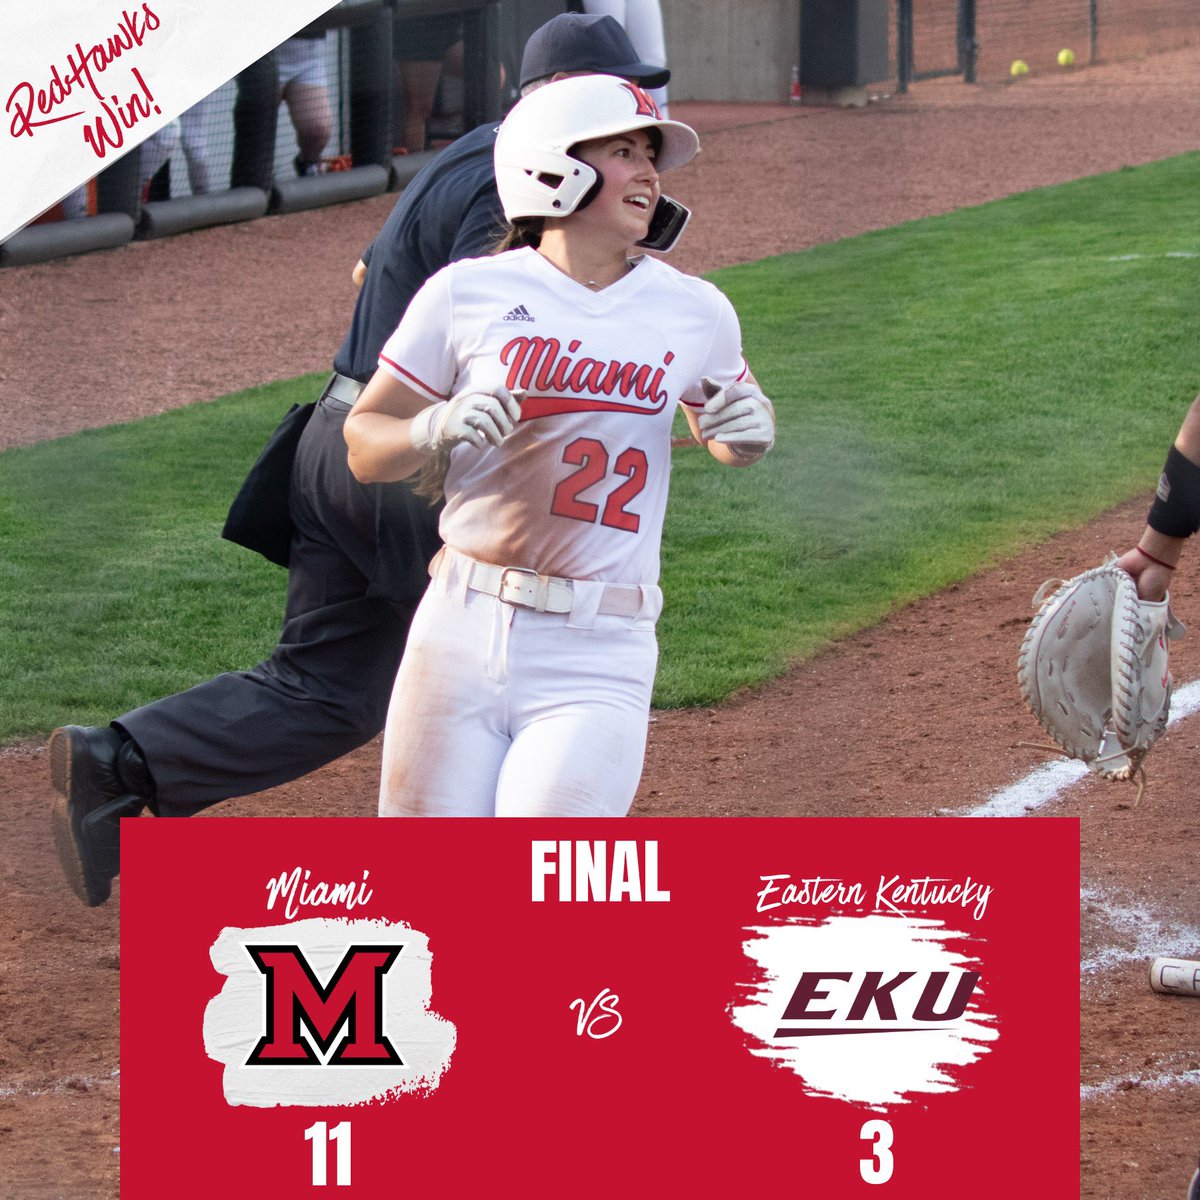 The RedHawks win in 5! 🔴 Karli Spaid moves into second place all time in career home runs with 96 🔴 Kate Kobayashi had 3 RBI 🔴 Madi Reeves picks up her 17th win of the season #RiseUpRedHawks